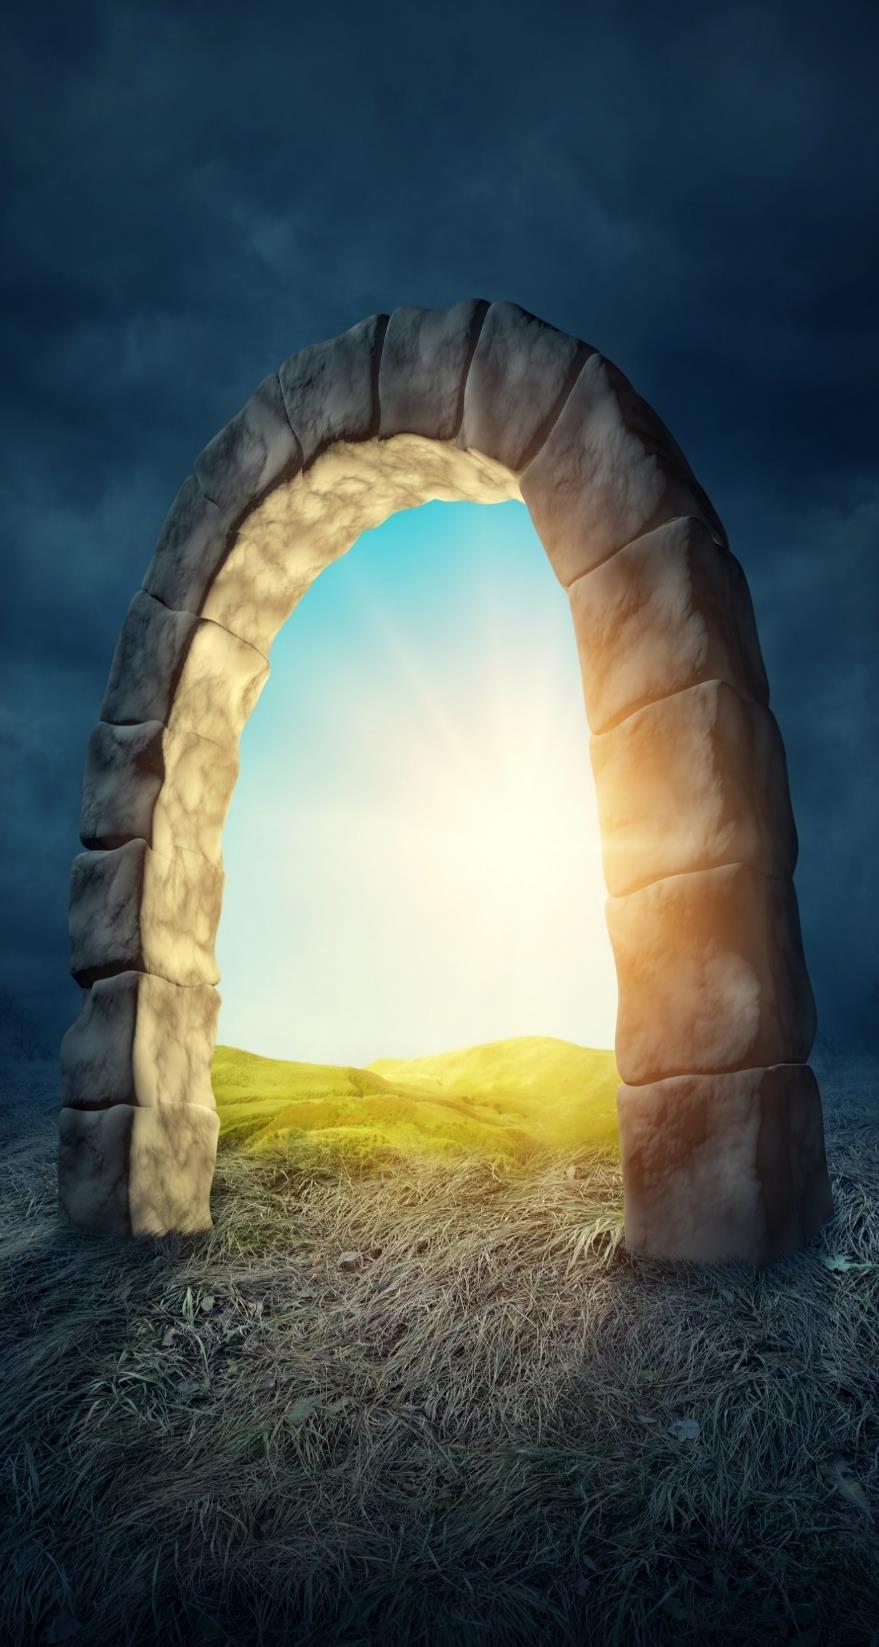 John did not see stairs, he saw an open door. He knows it is a door to the heavenly realm. He hears the voice which he compares to a trumpet, perhaps a shofar.